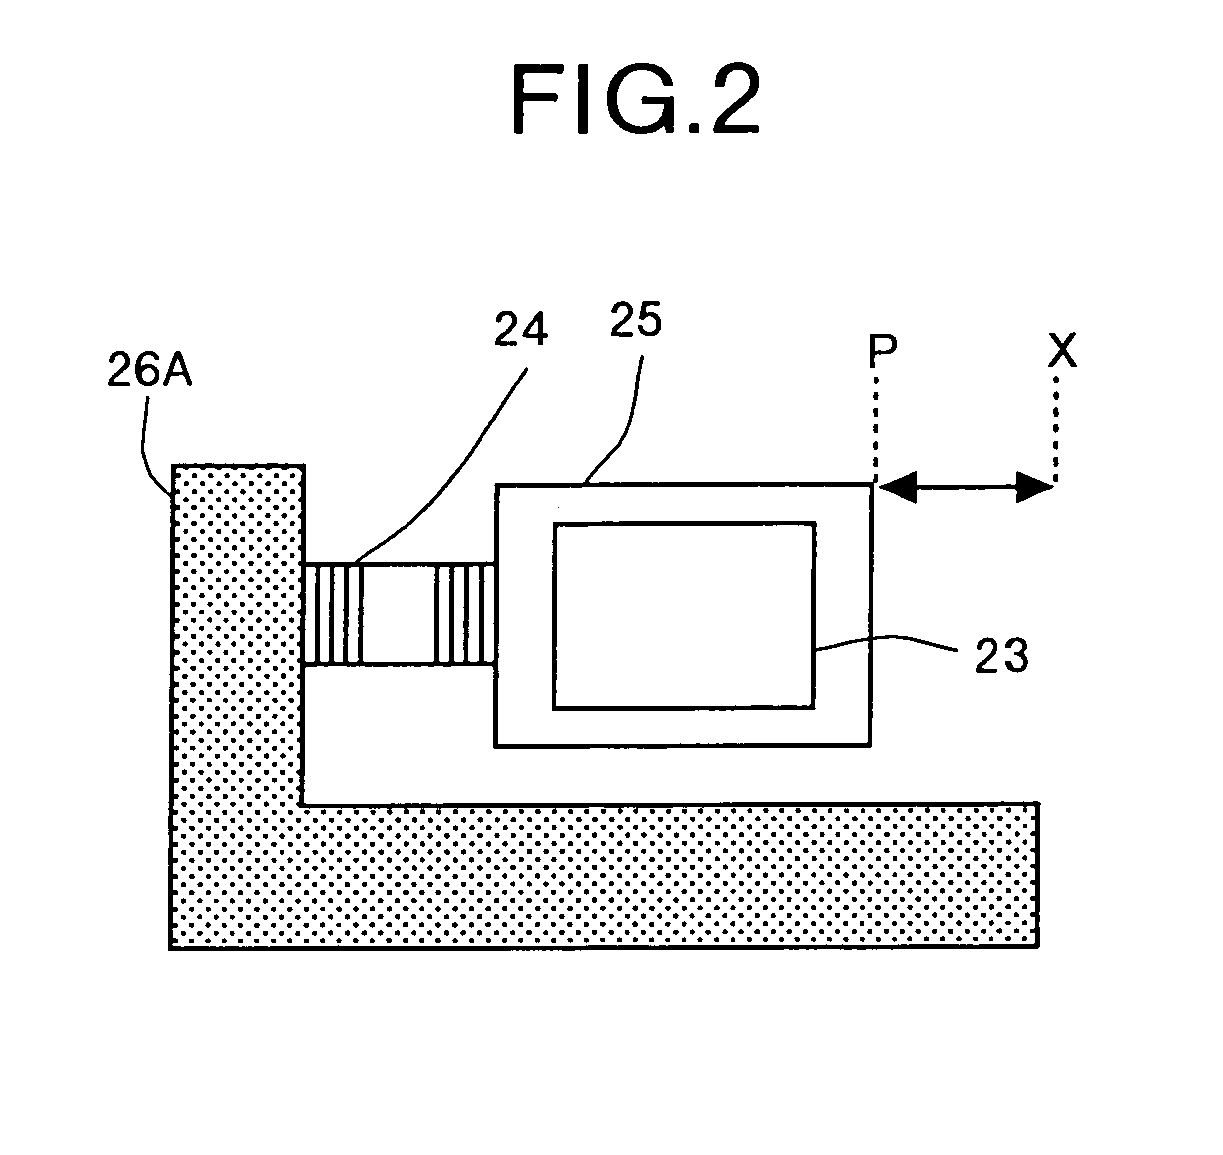 Digital camera with power supply for piezoelectric element and stroboscope circuit